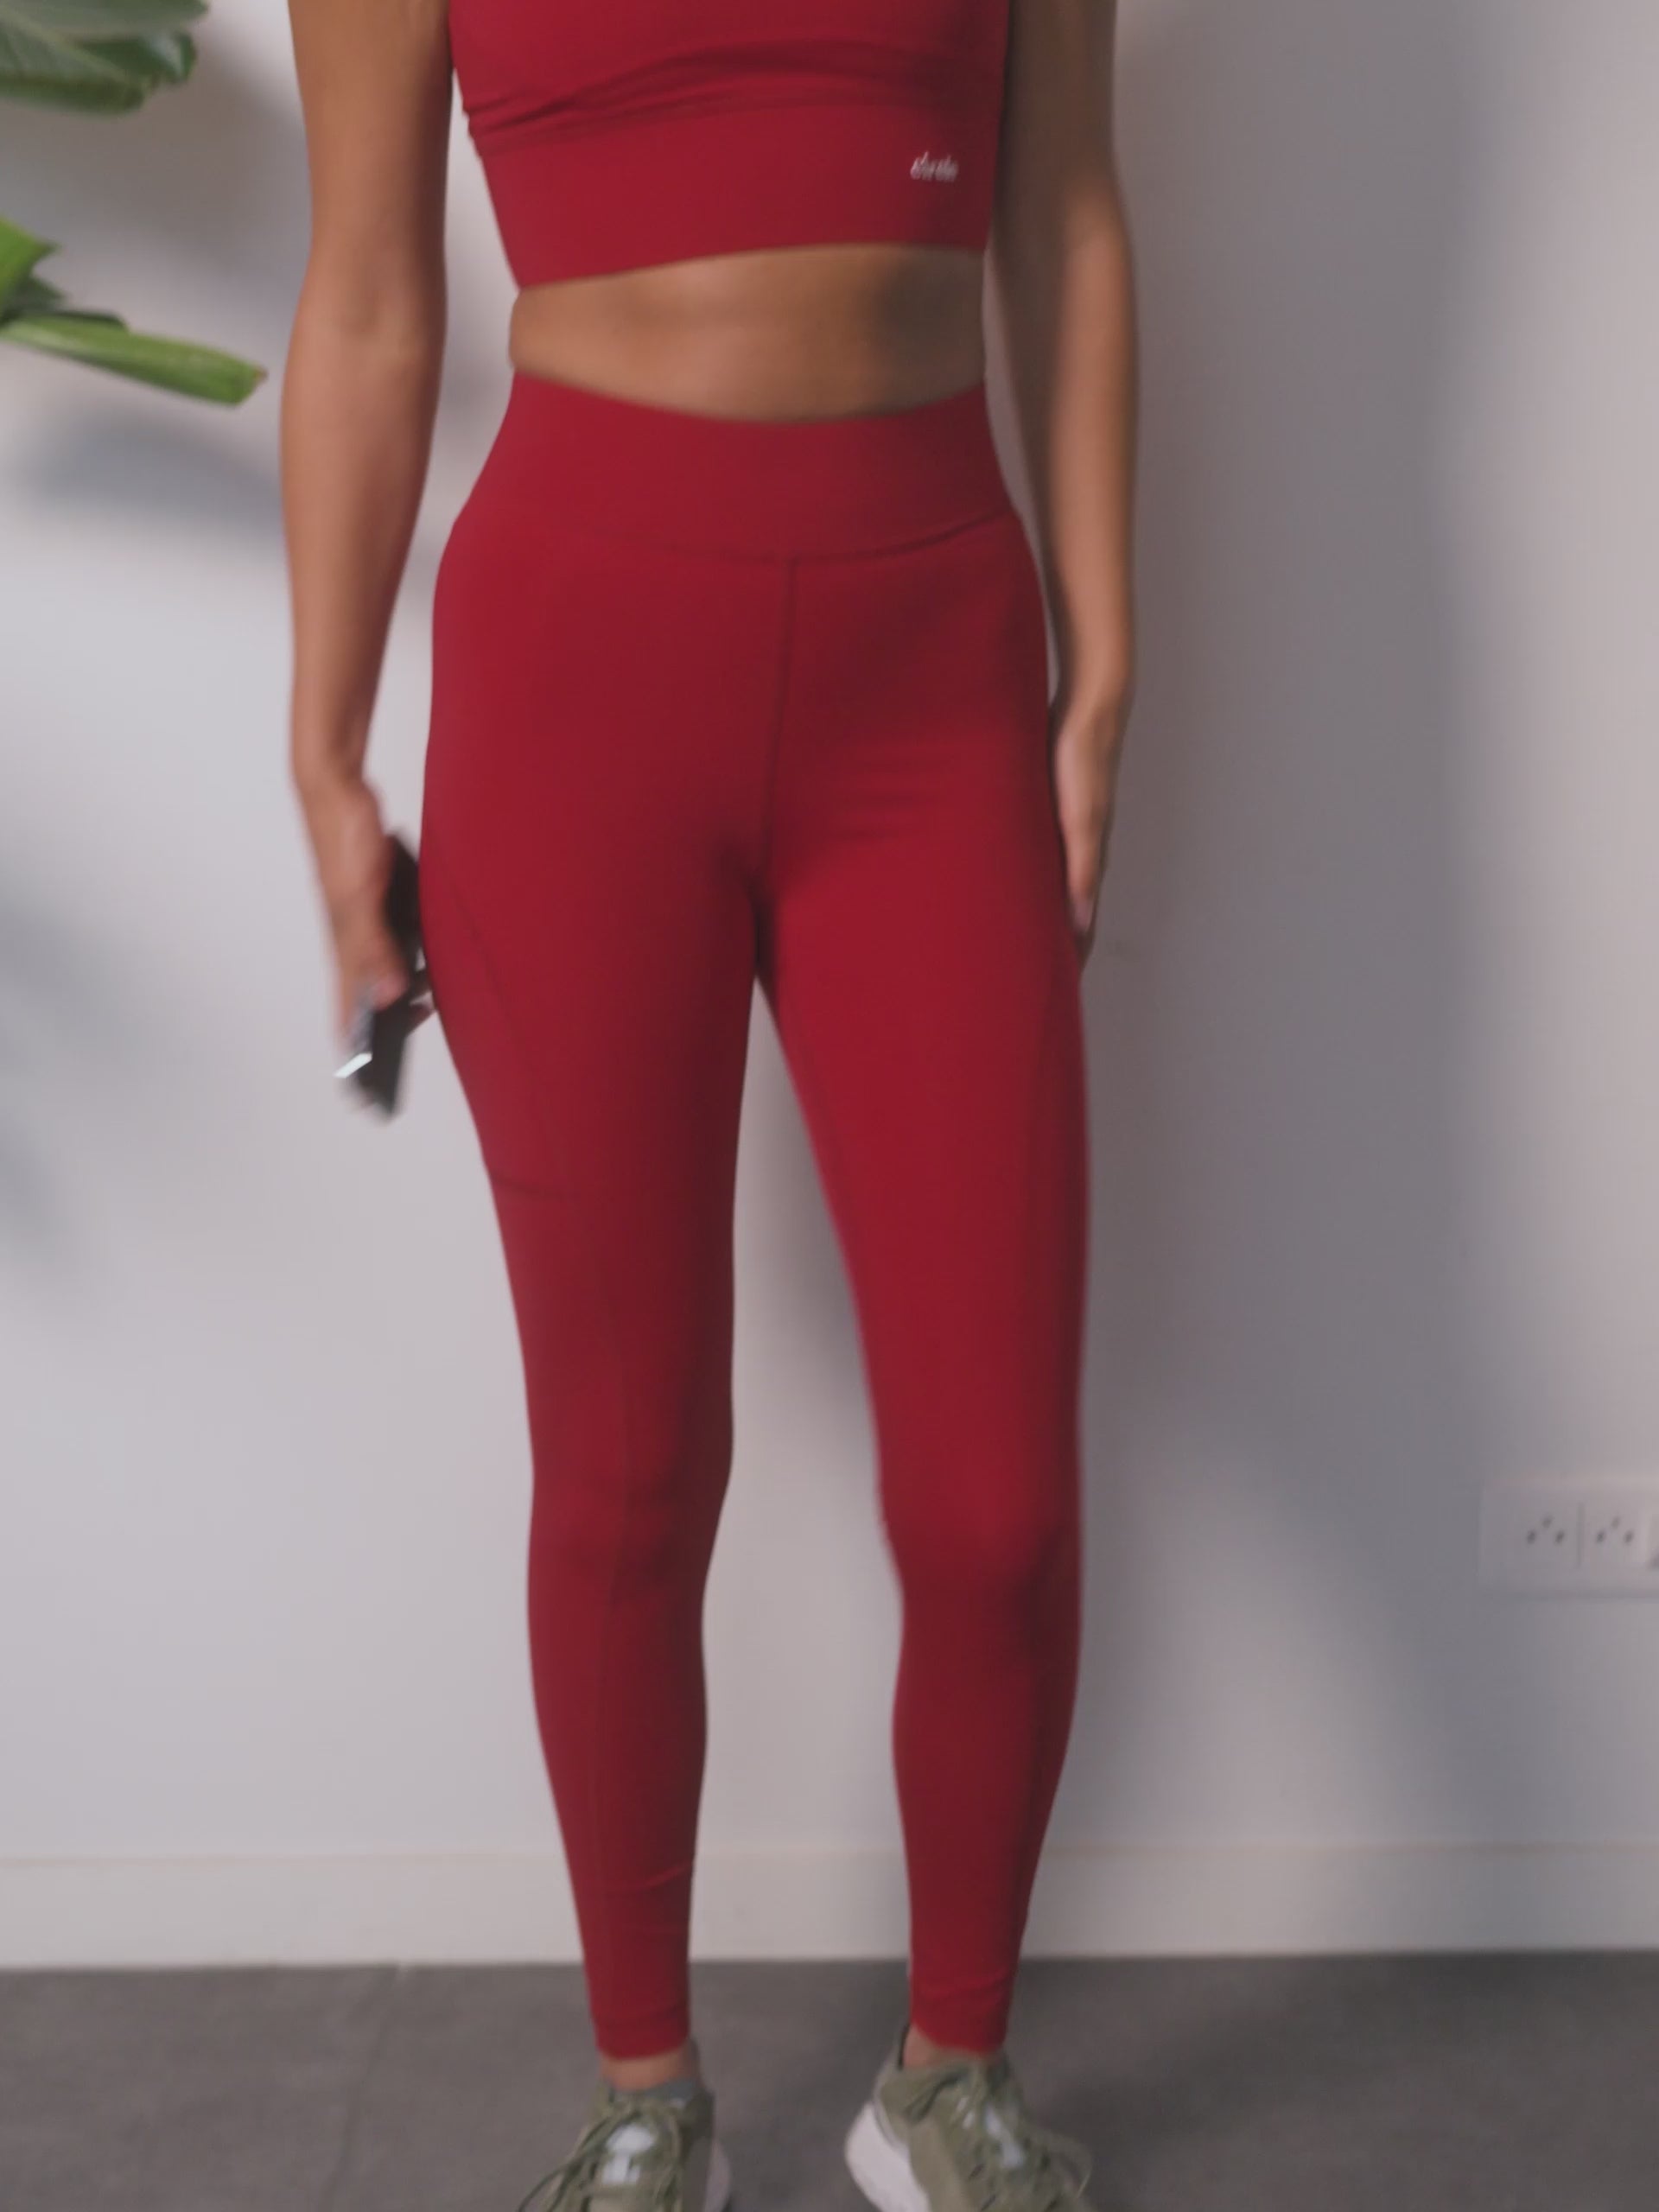 legging_get_in_shape_cherry_red_2.mp4